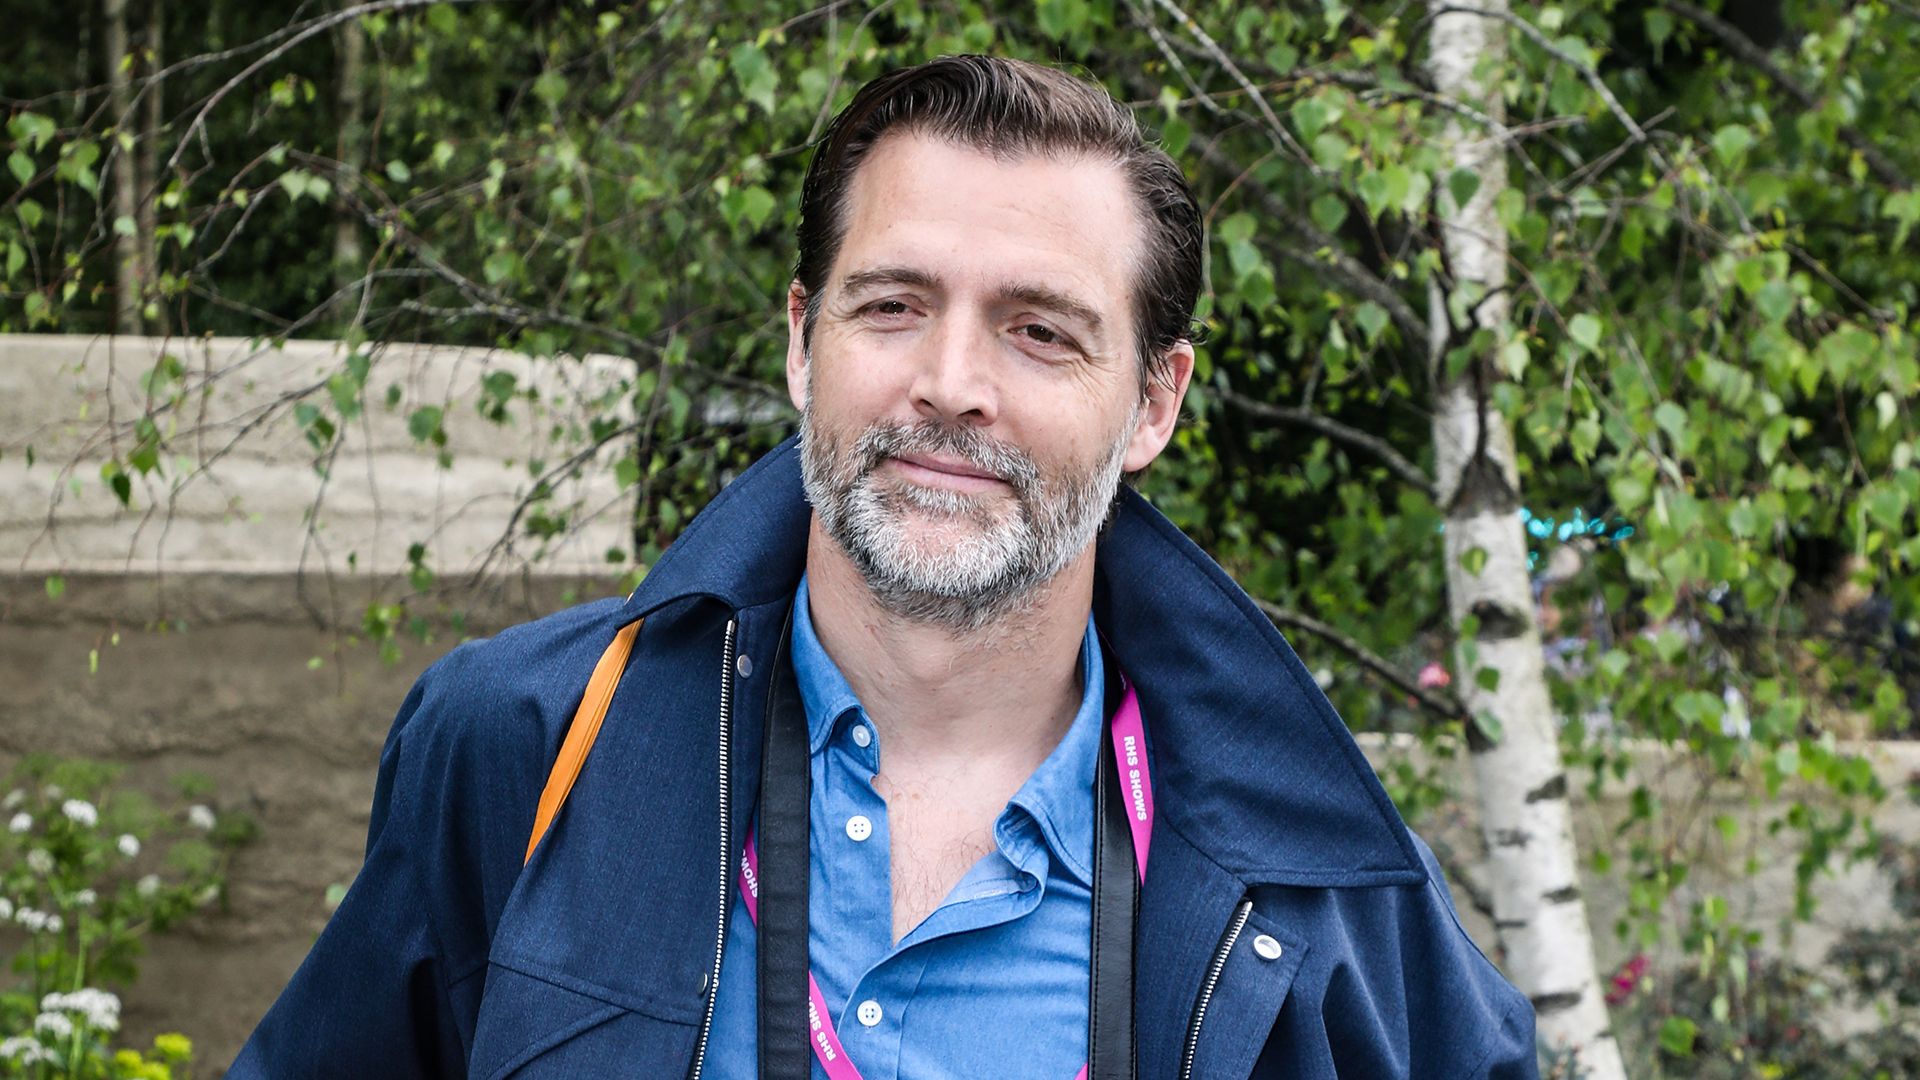 The Great British Sewing Bee star Patrick Grant's relationship status ...